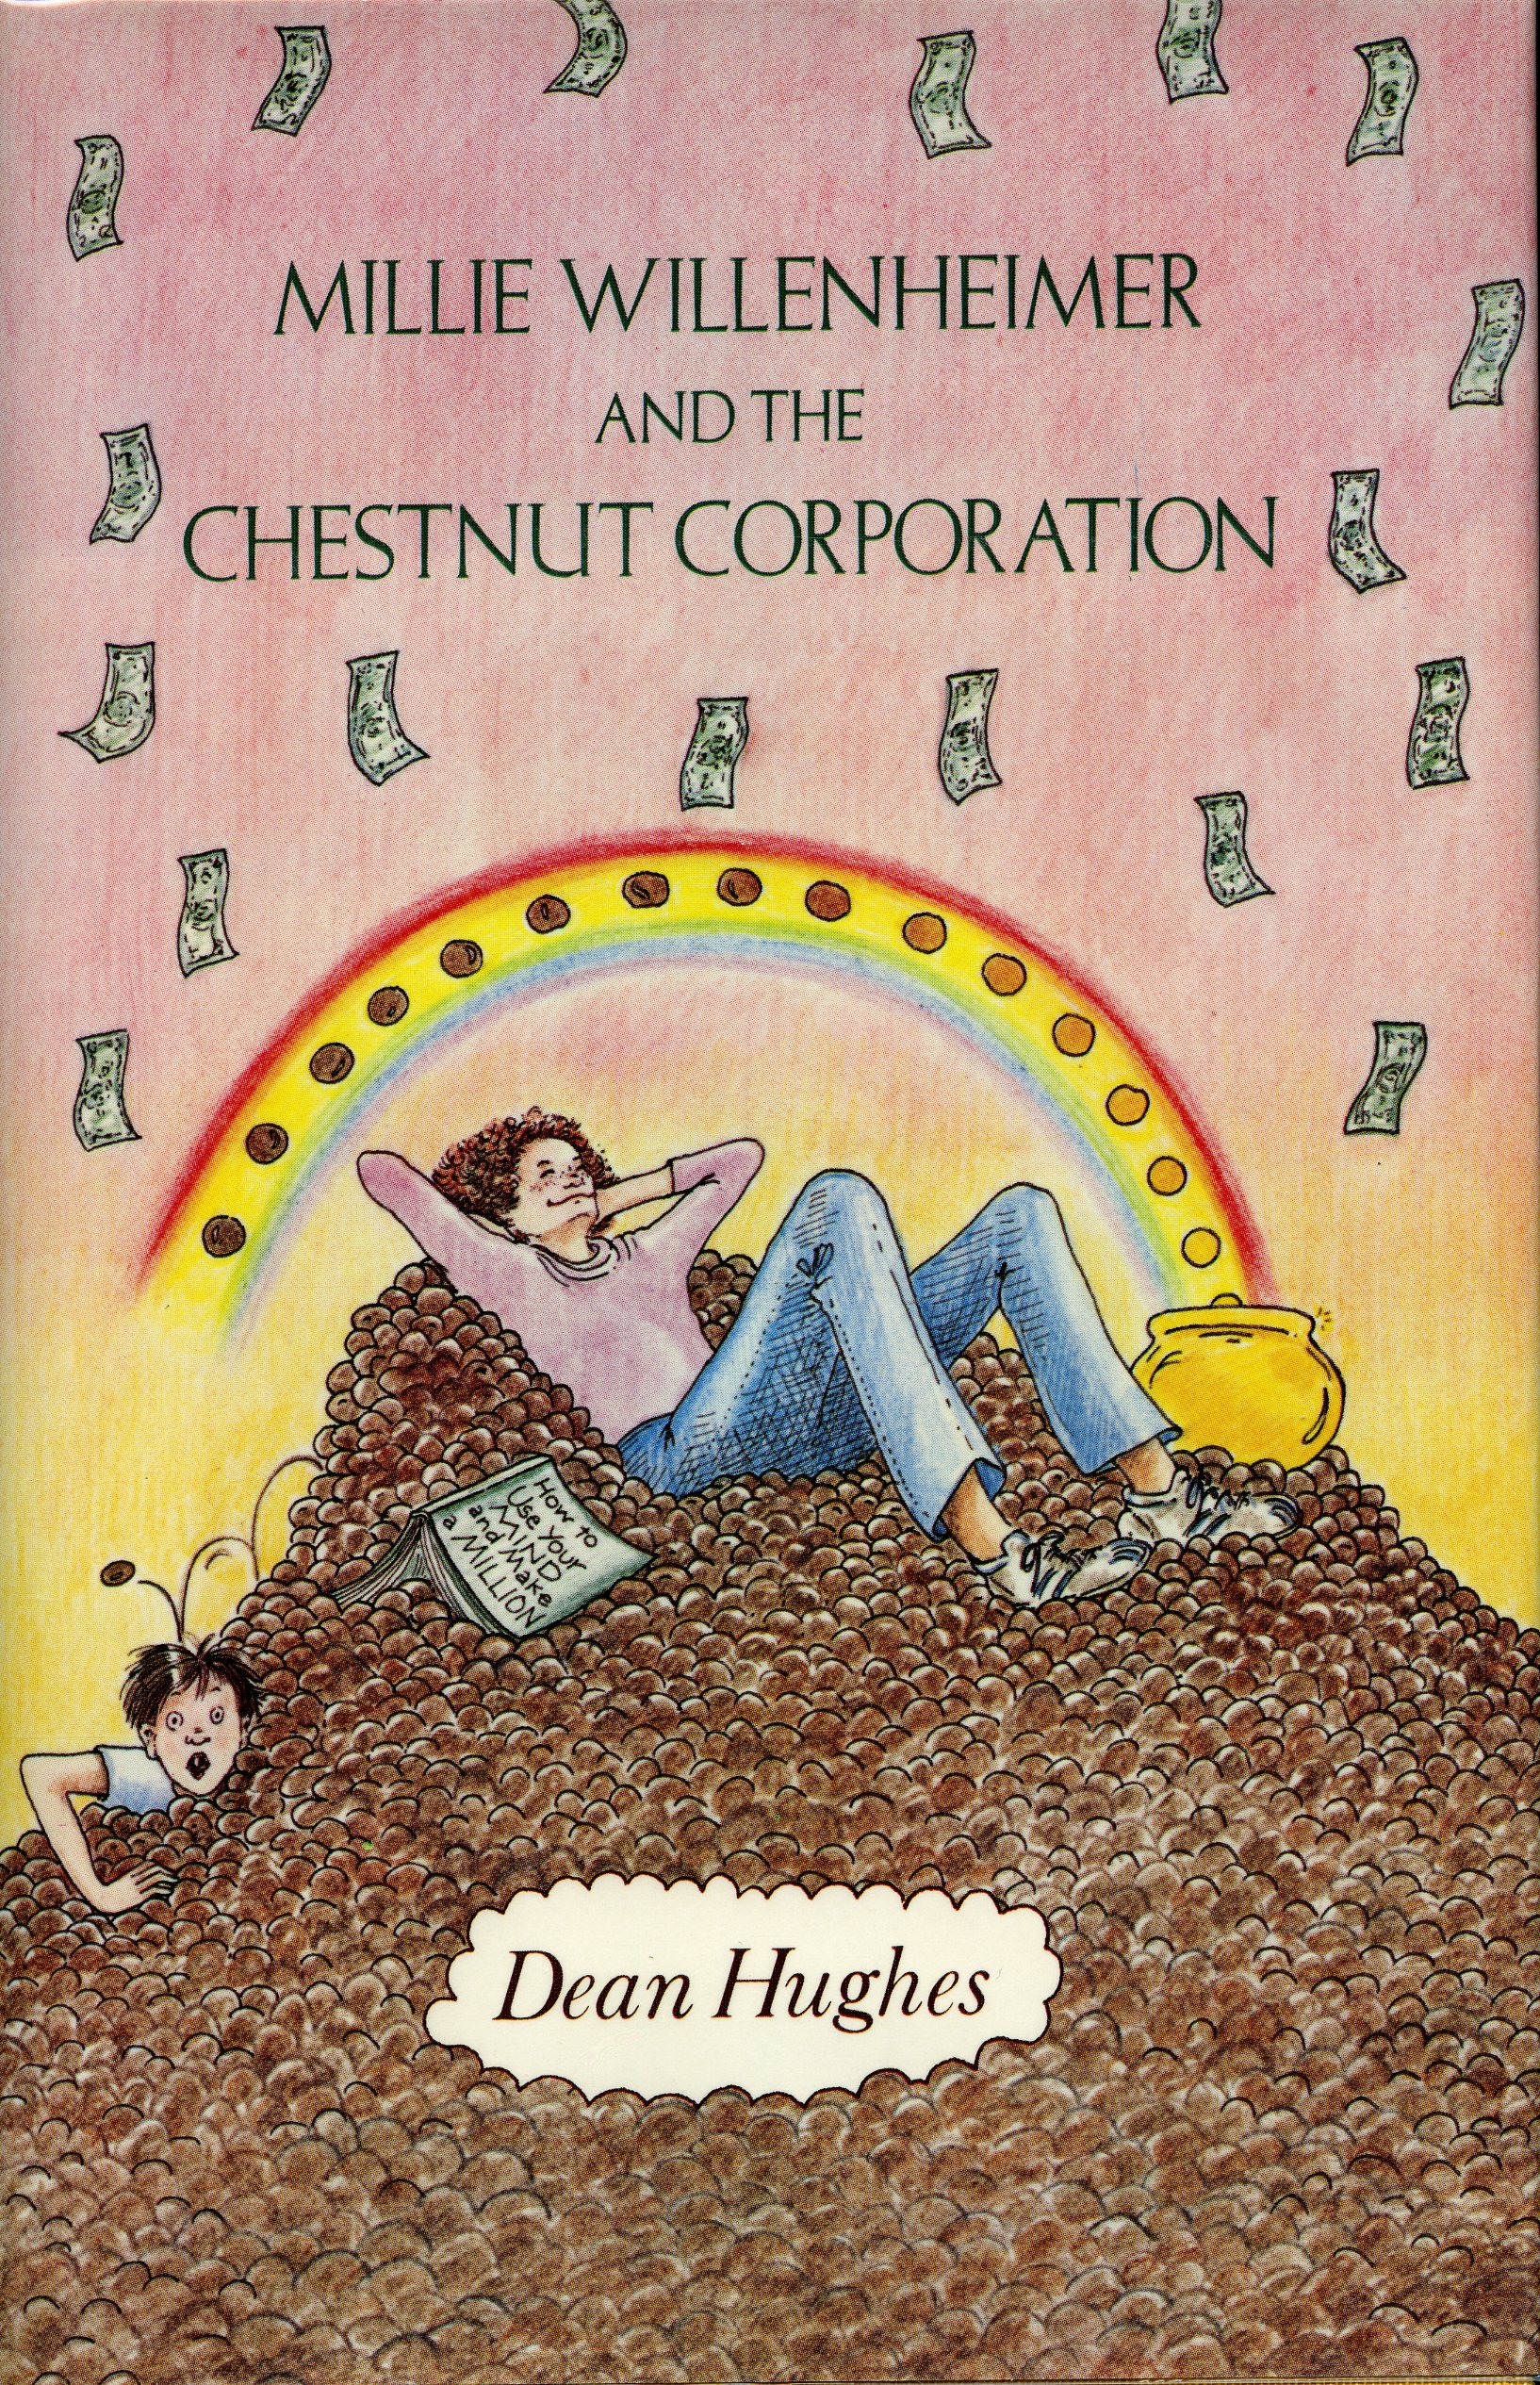 Millie Willenheimer and the Chestnut Corporation by Dean Hughes